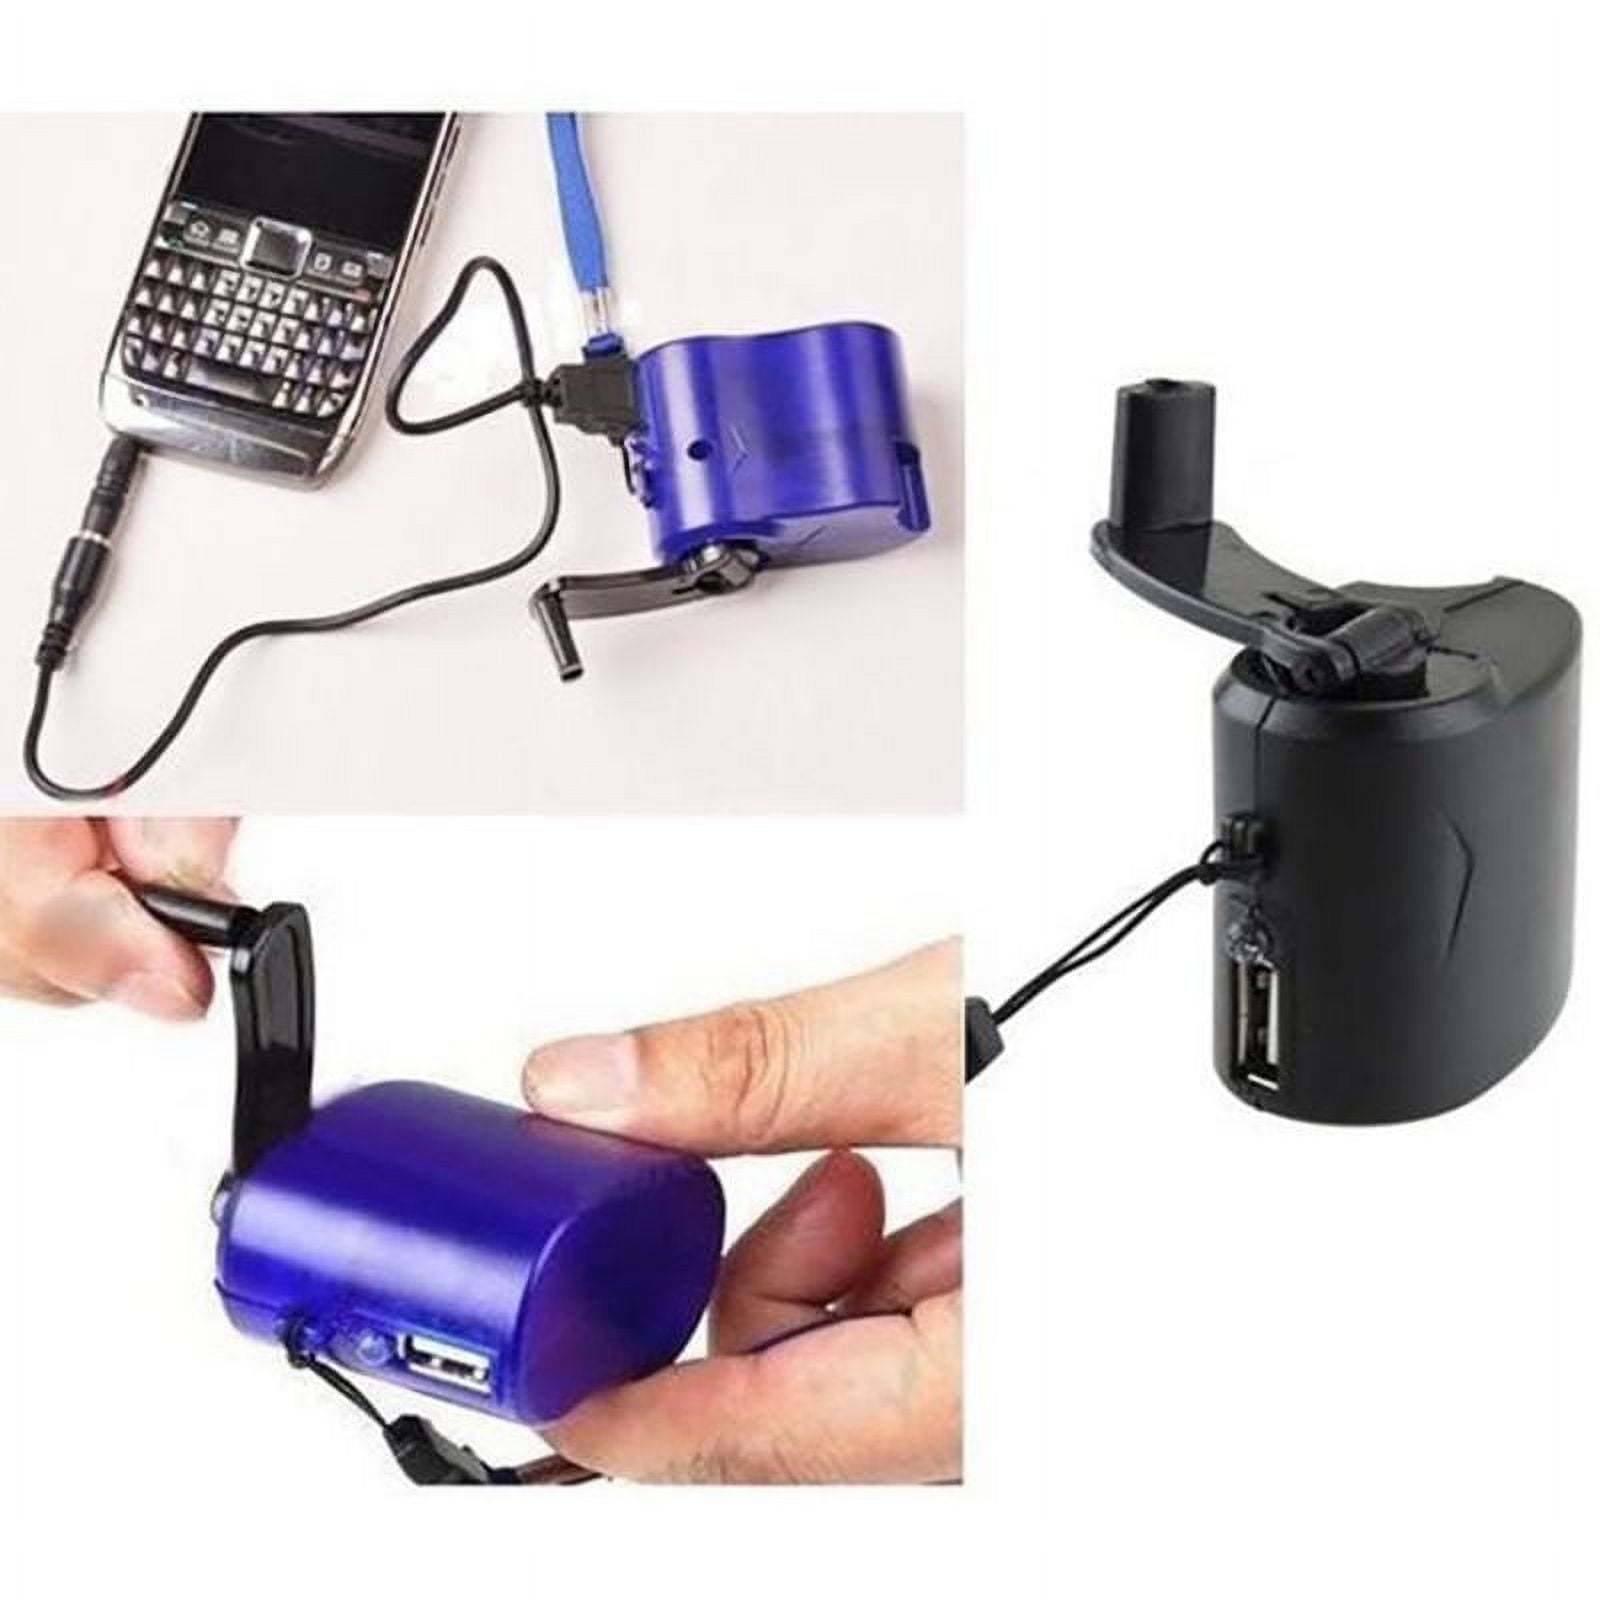 220v Outdoor Hand Crank Generator Power Bank Phone Charger Manual Charge  Dynamo Fx